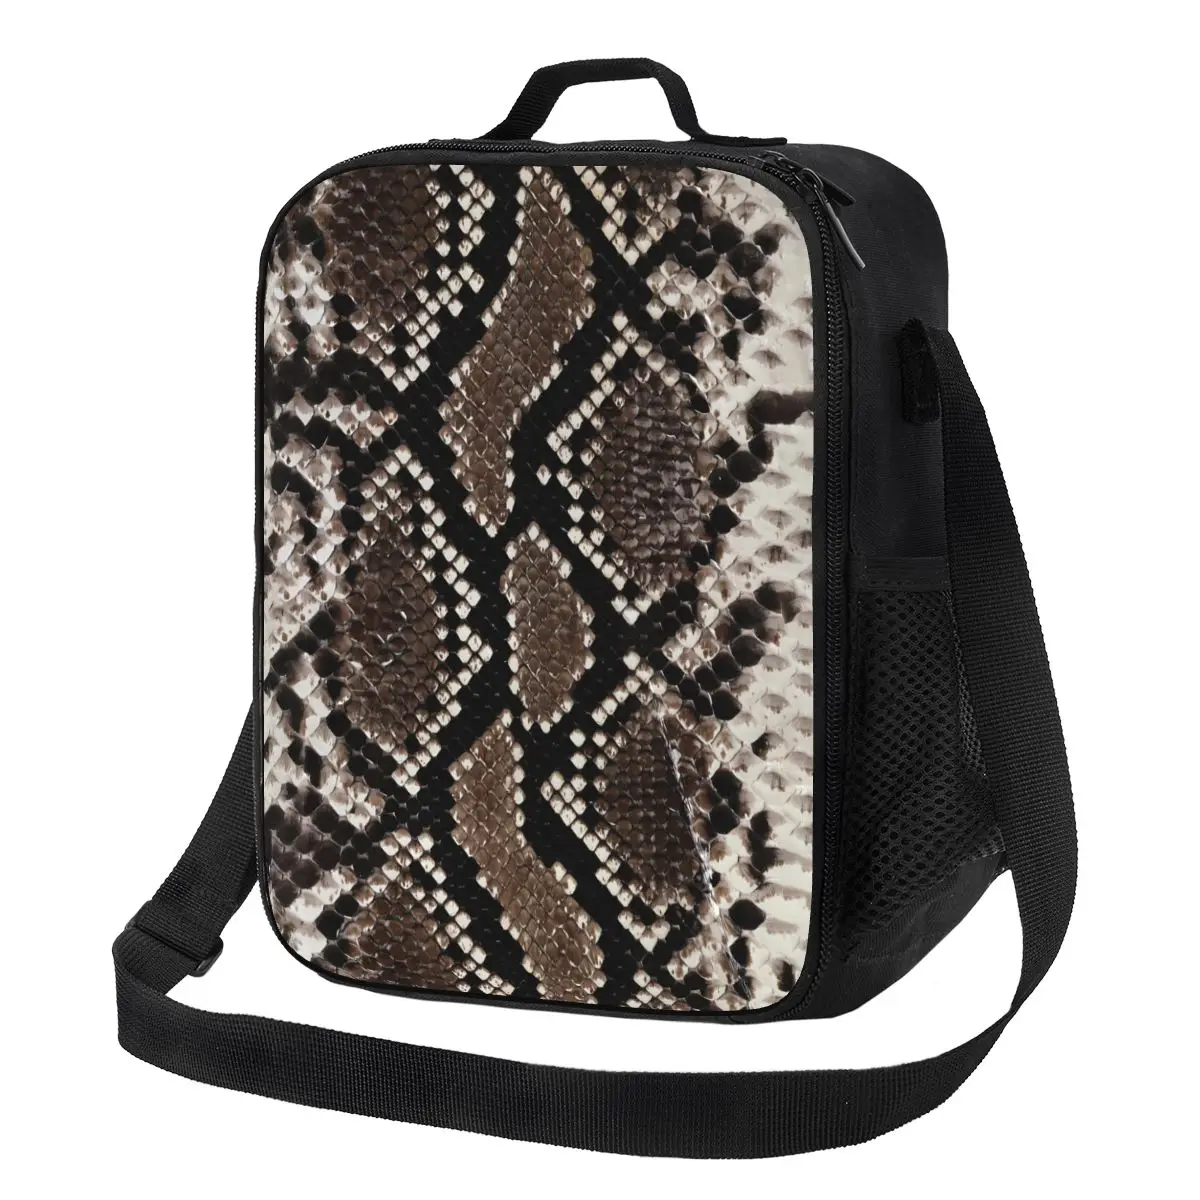 

Python Snakeskin Print Lunch Bag Brown And White Travel Lunch Box For Child Casual Print Tote Food Bags Oxford Cooler Bag